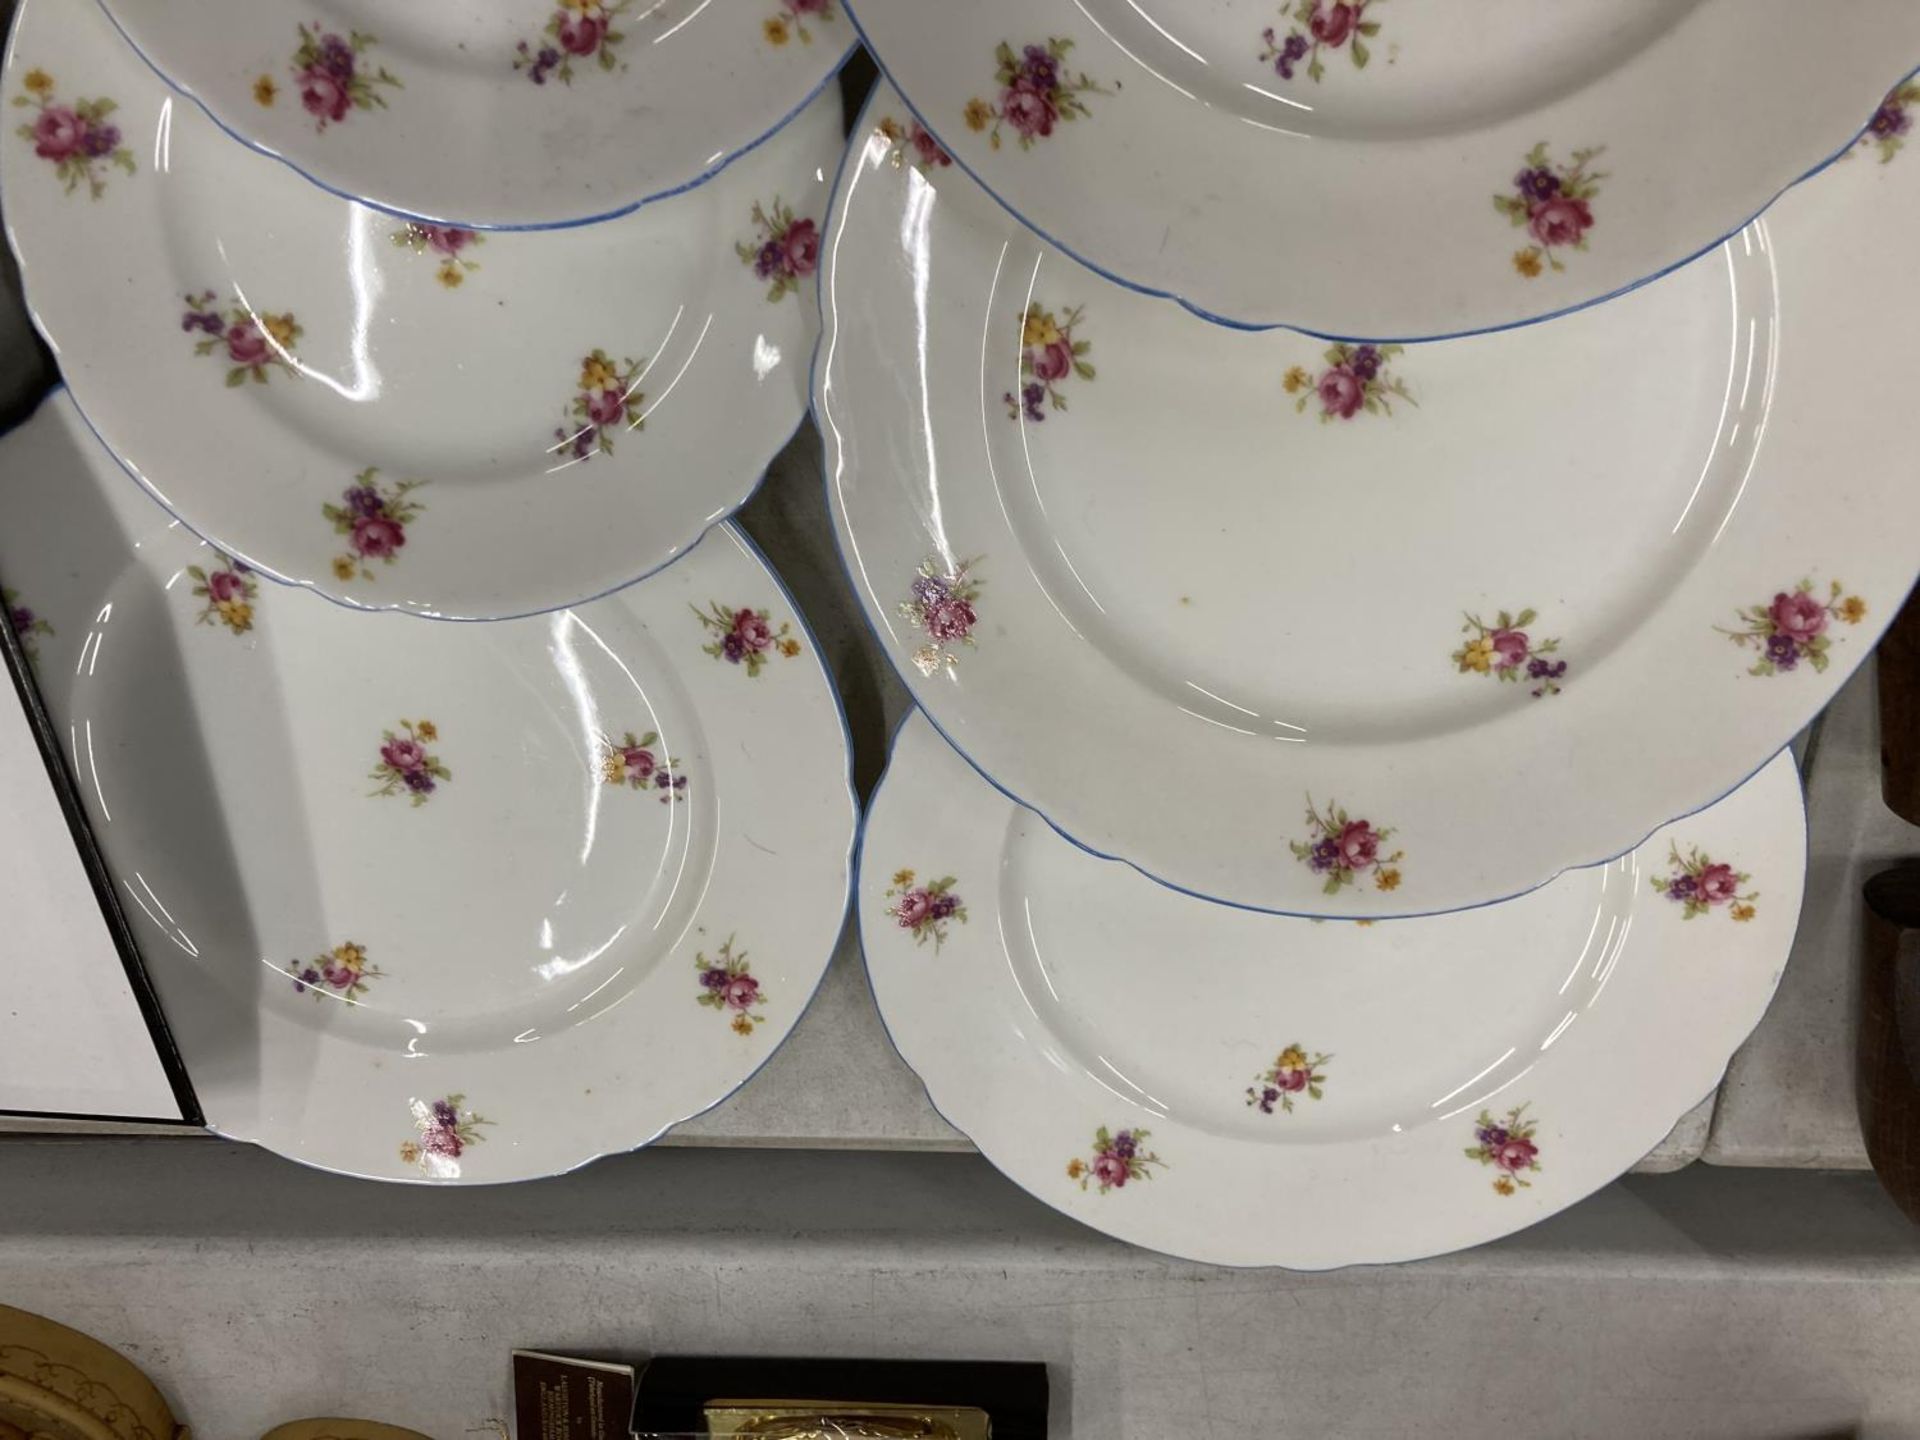 A QUANTITY OF SHELLEY CHINA PLATES WITH A DELICATE FLORAL PATTERN - 12 IN TOTAL - Bild 3 aus 3